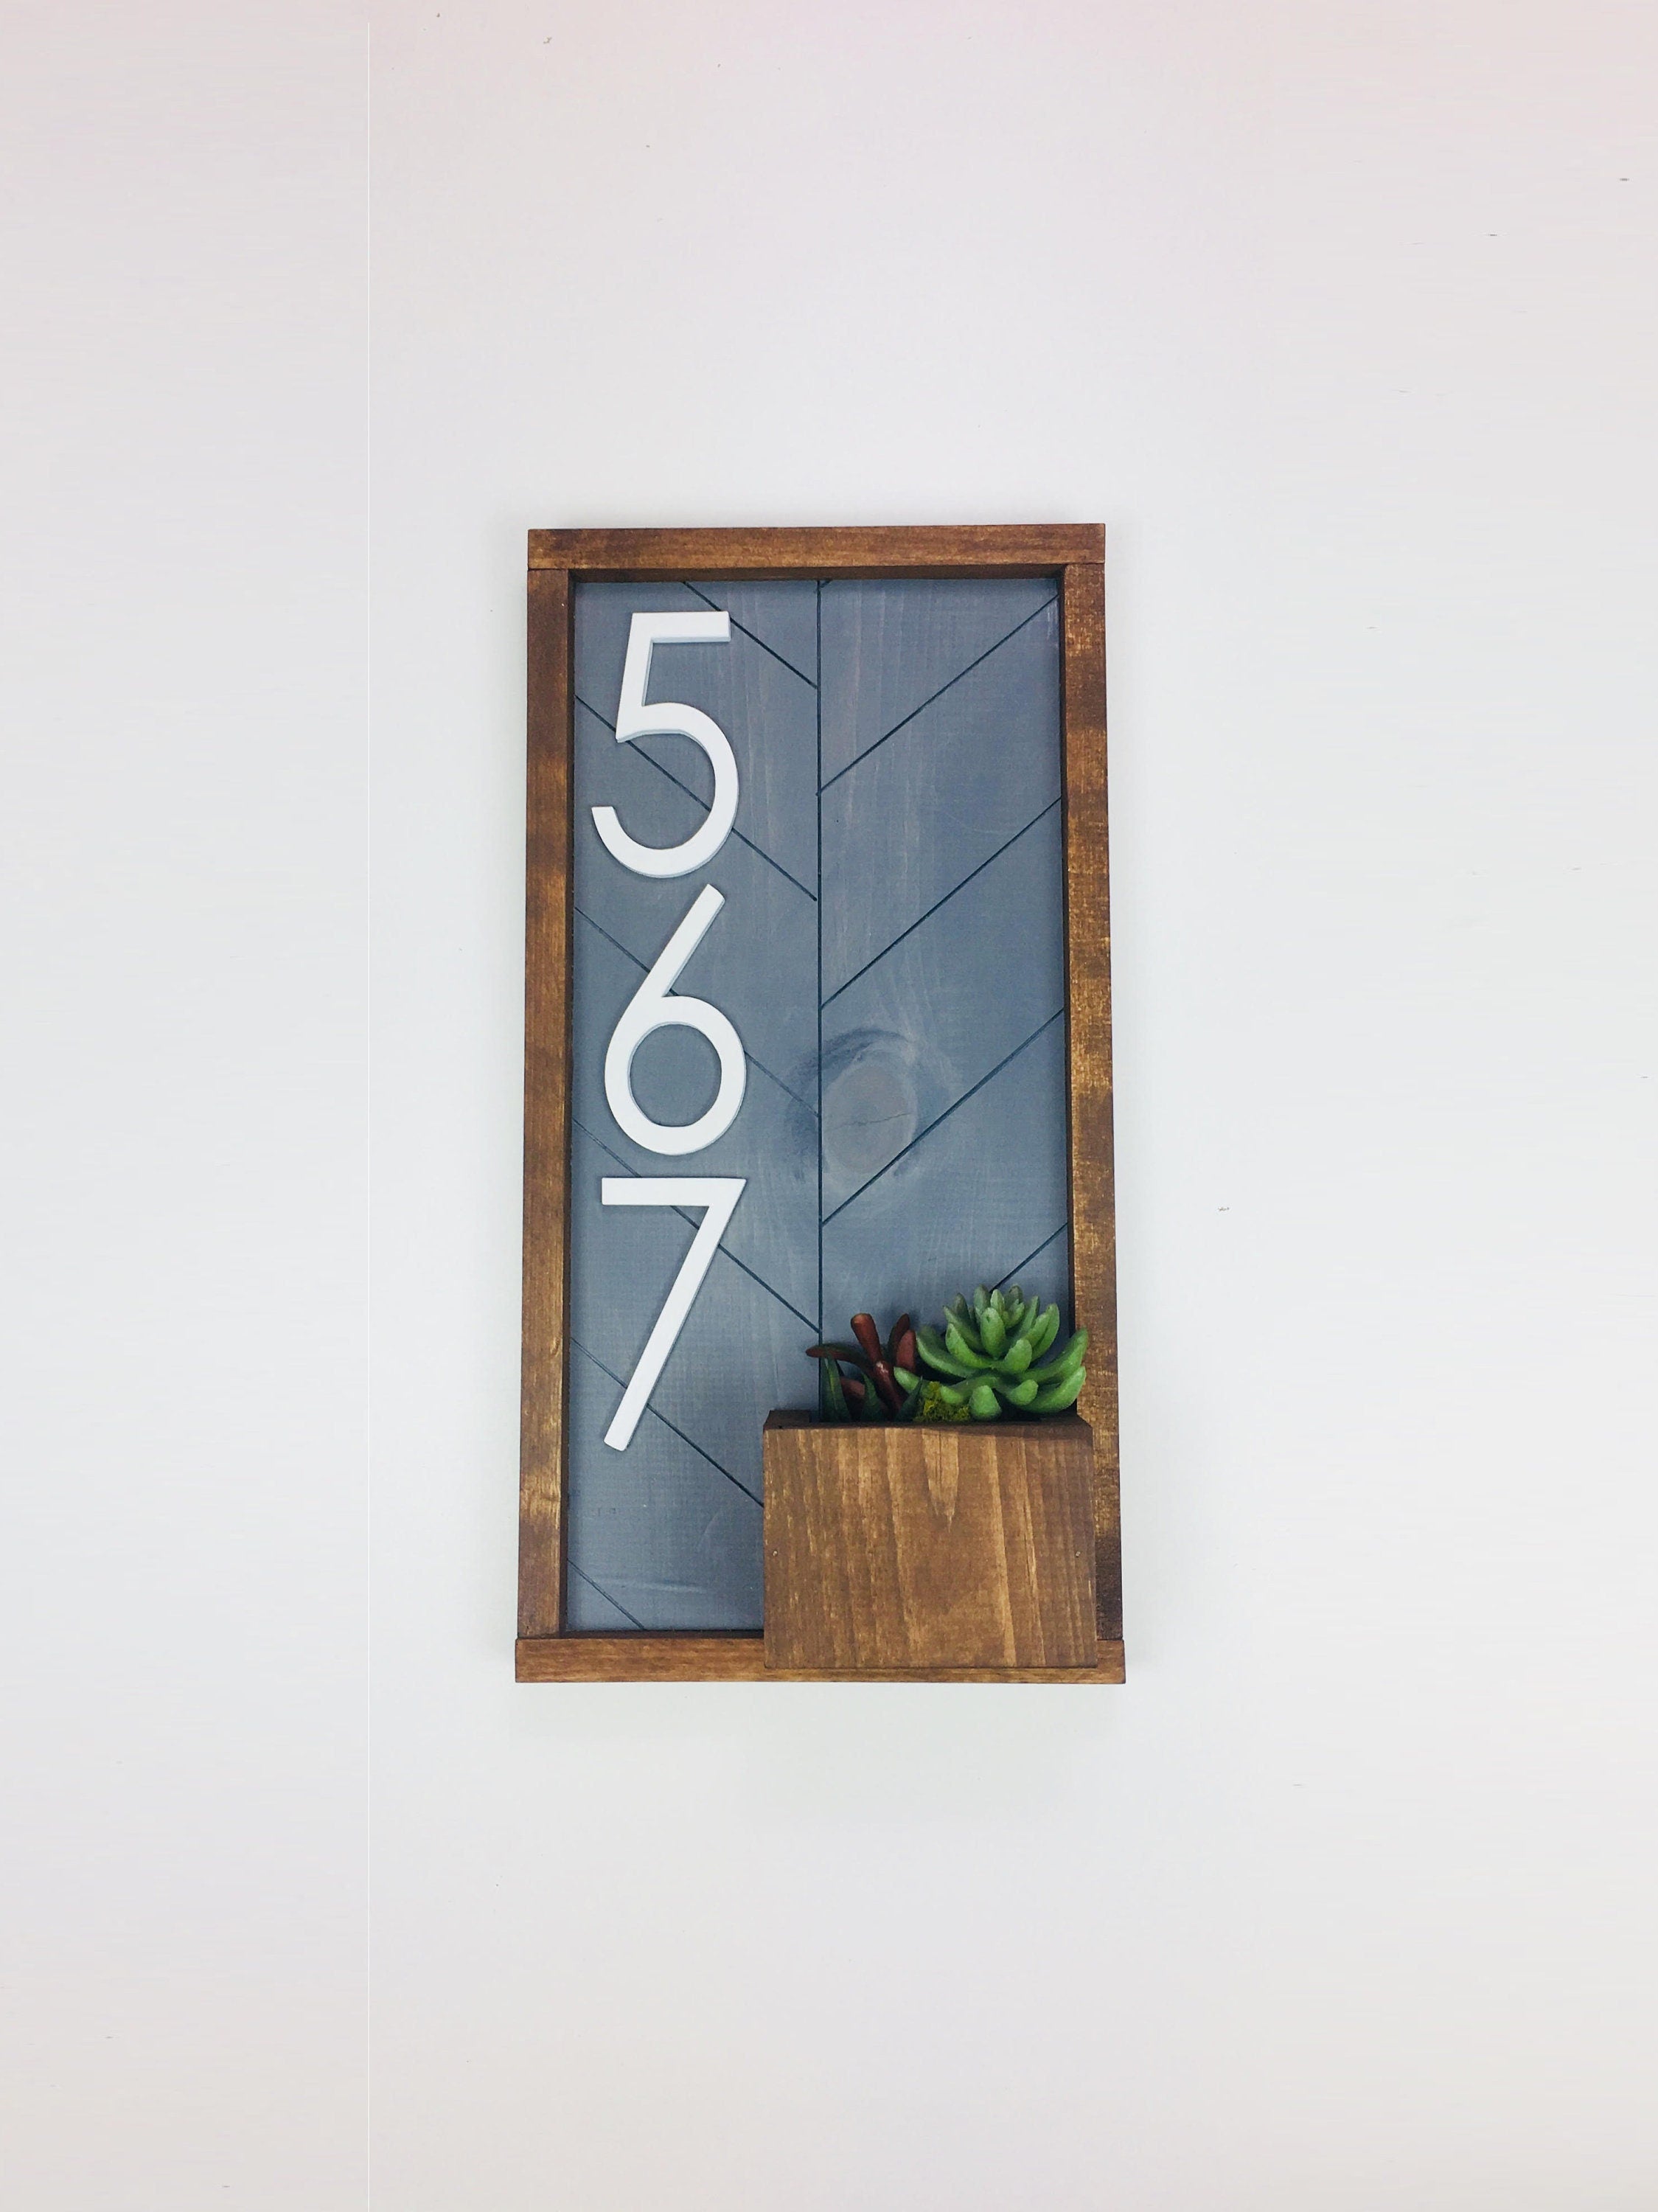 Cresswell Vertical Address Sign with Planter, Large Address Numbers for House, Rustic Address Plaque, Handmade Design for Modern Beach Homes